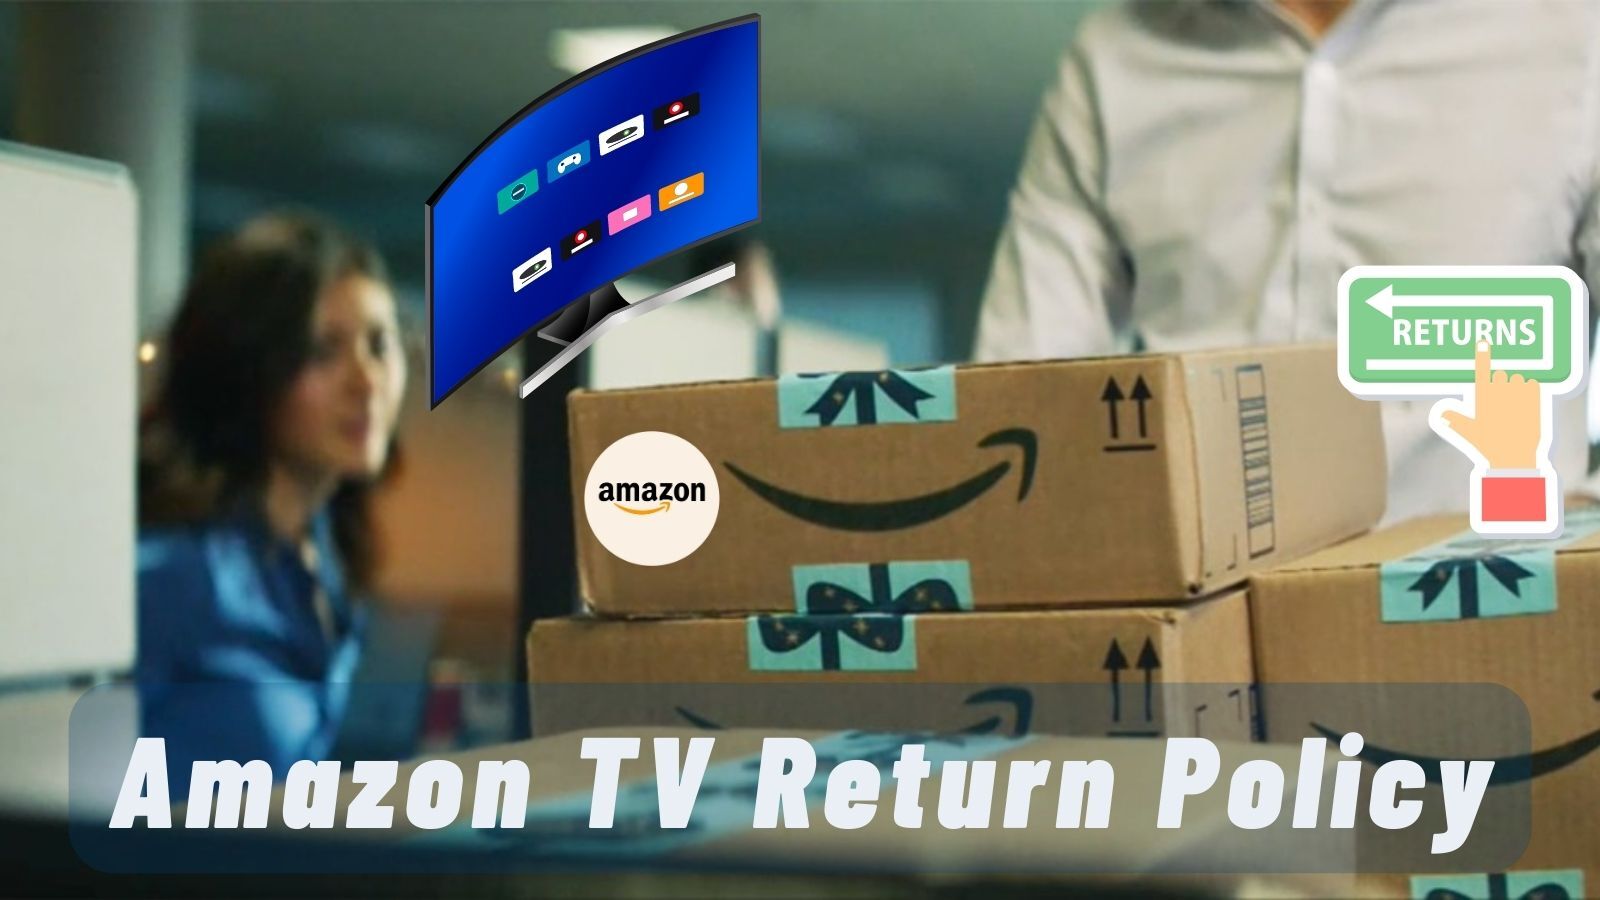 Amazon TV Return Policy (All You Need to Know!)